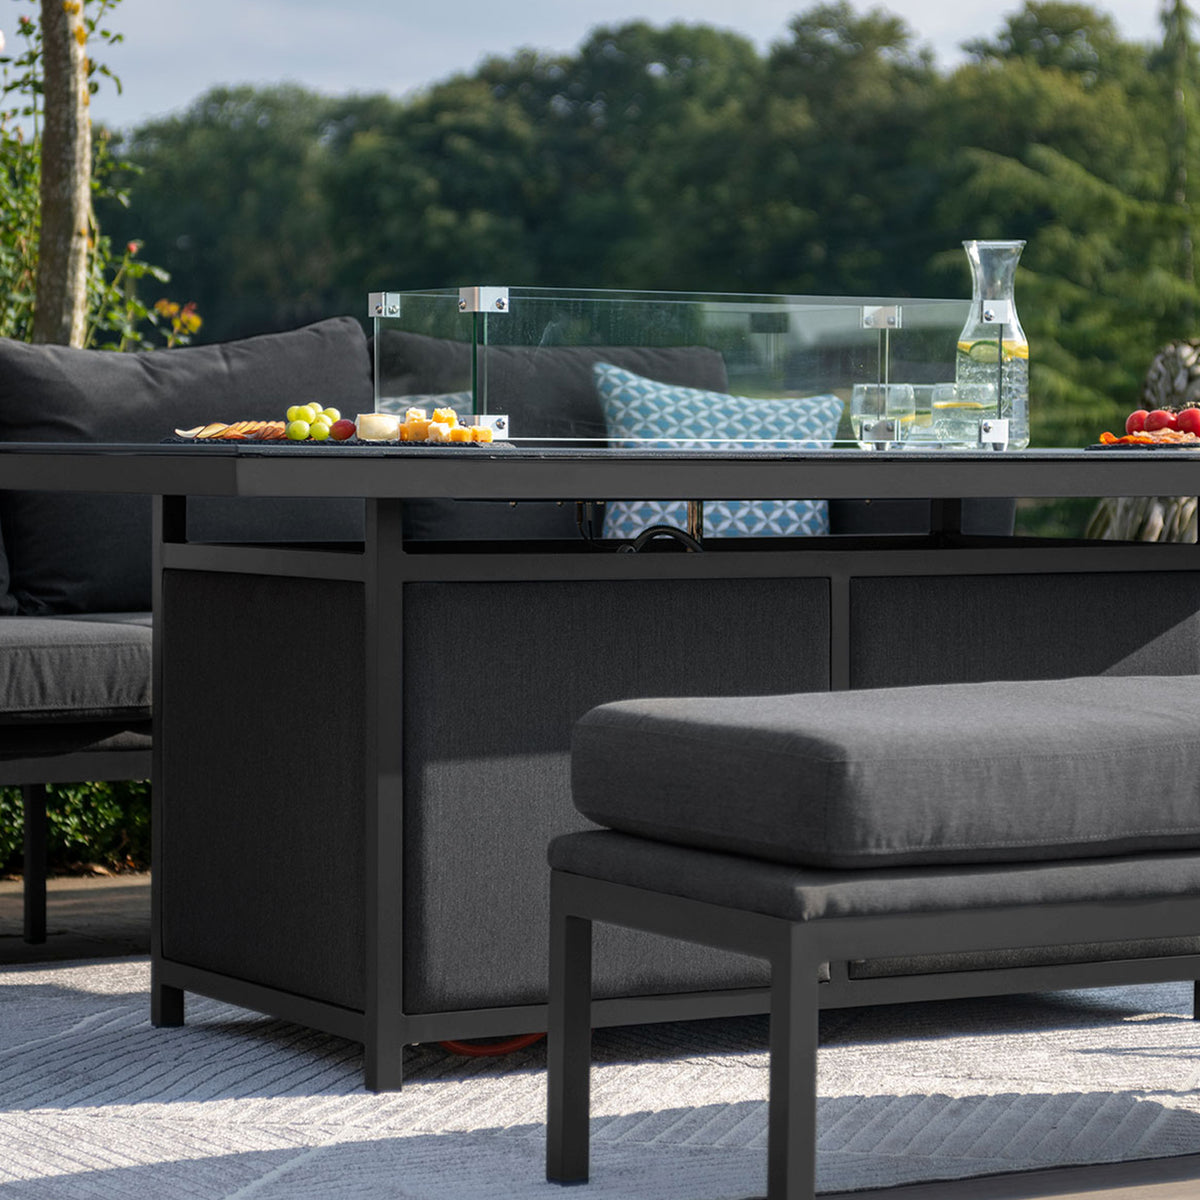 Maze Pulse Charcoal Grey 3 Seat Sofa Dining Set with Fire Pit from Roseland Furniture